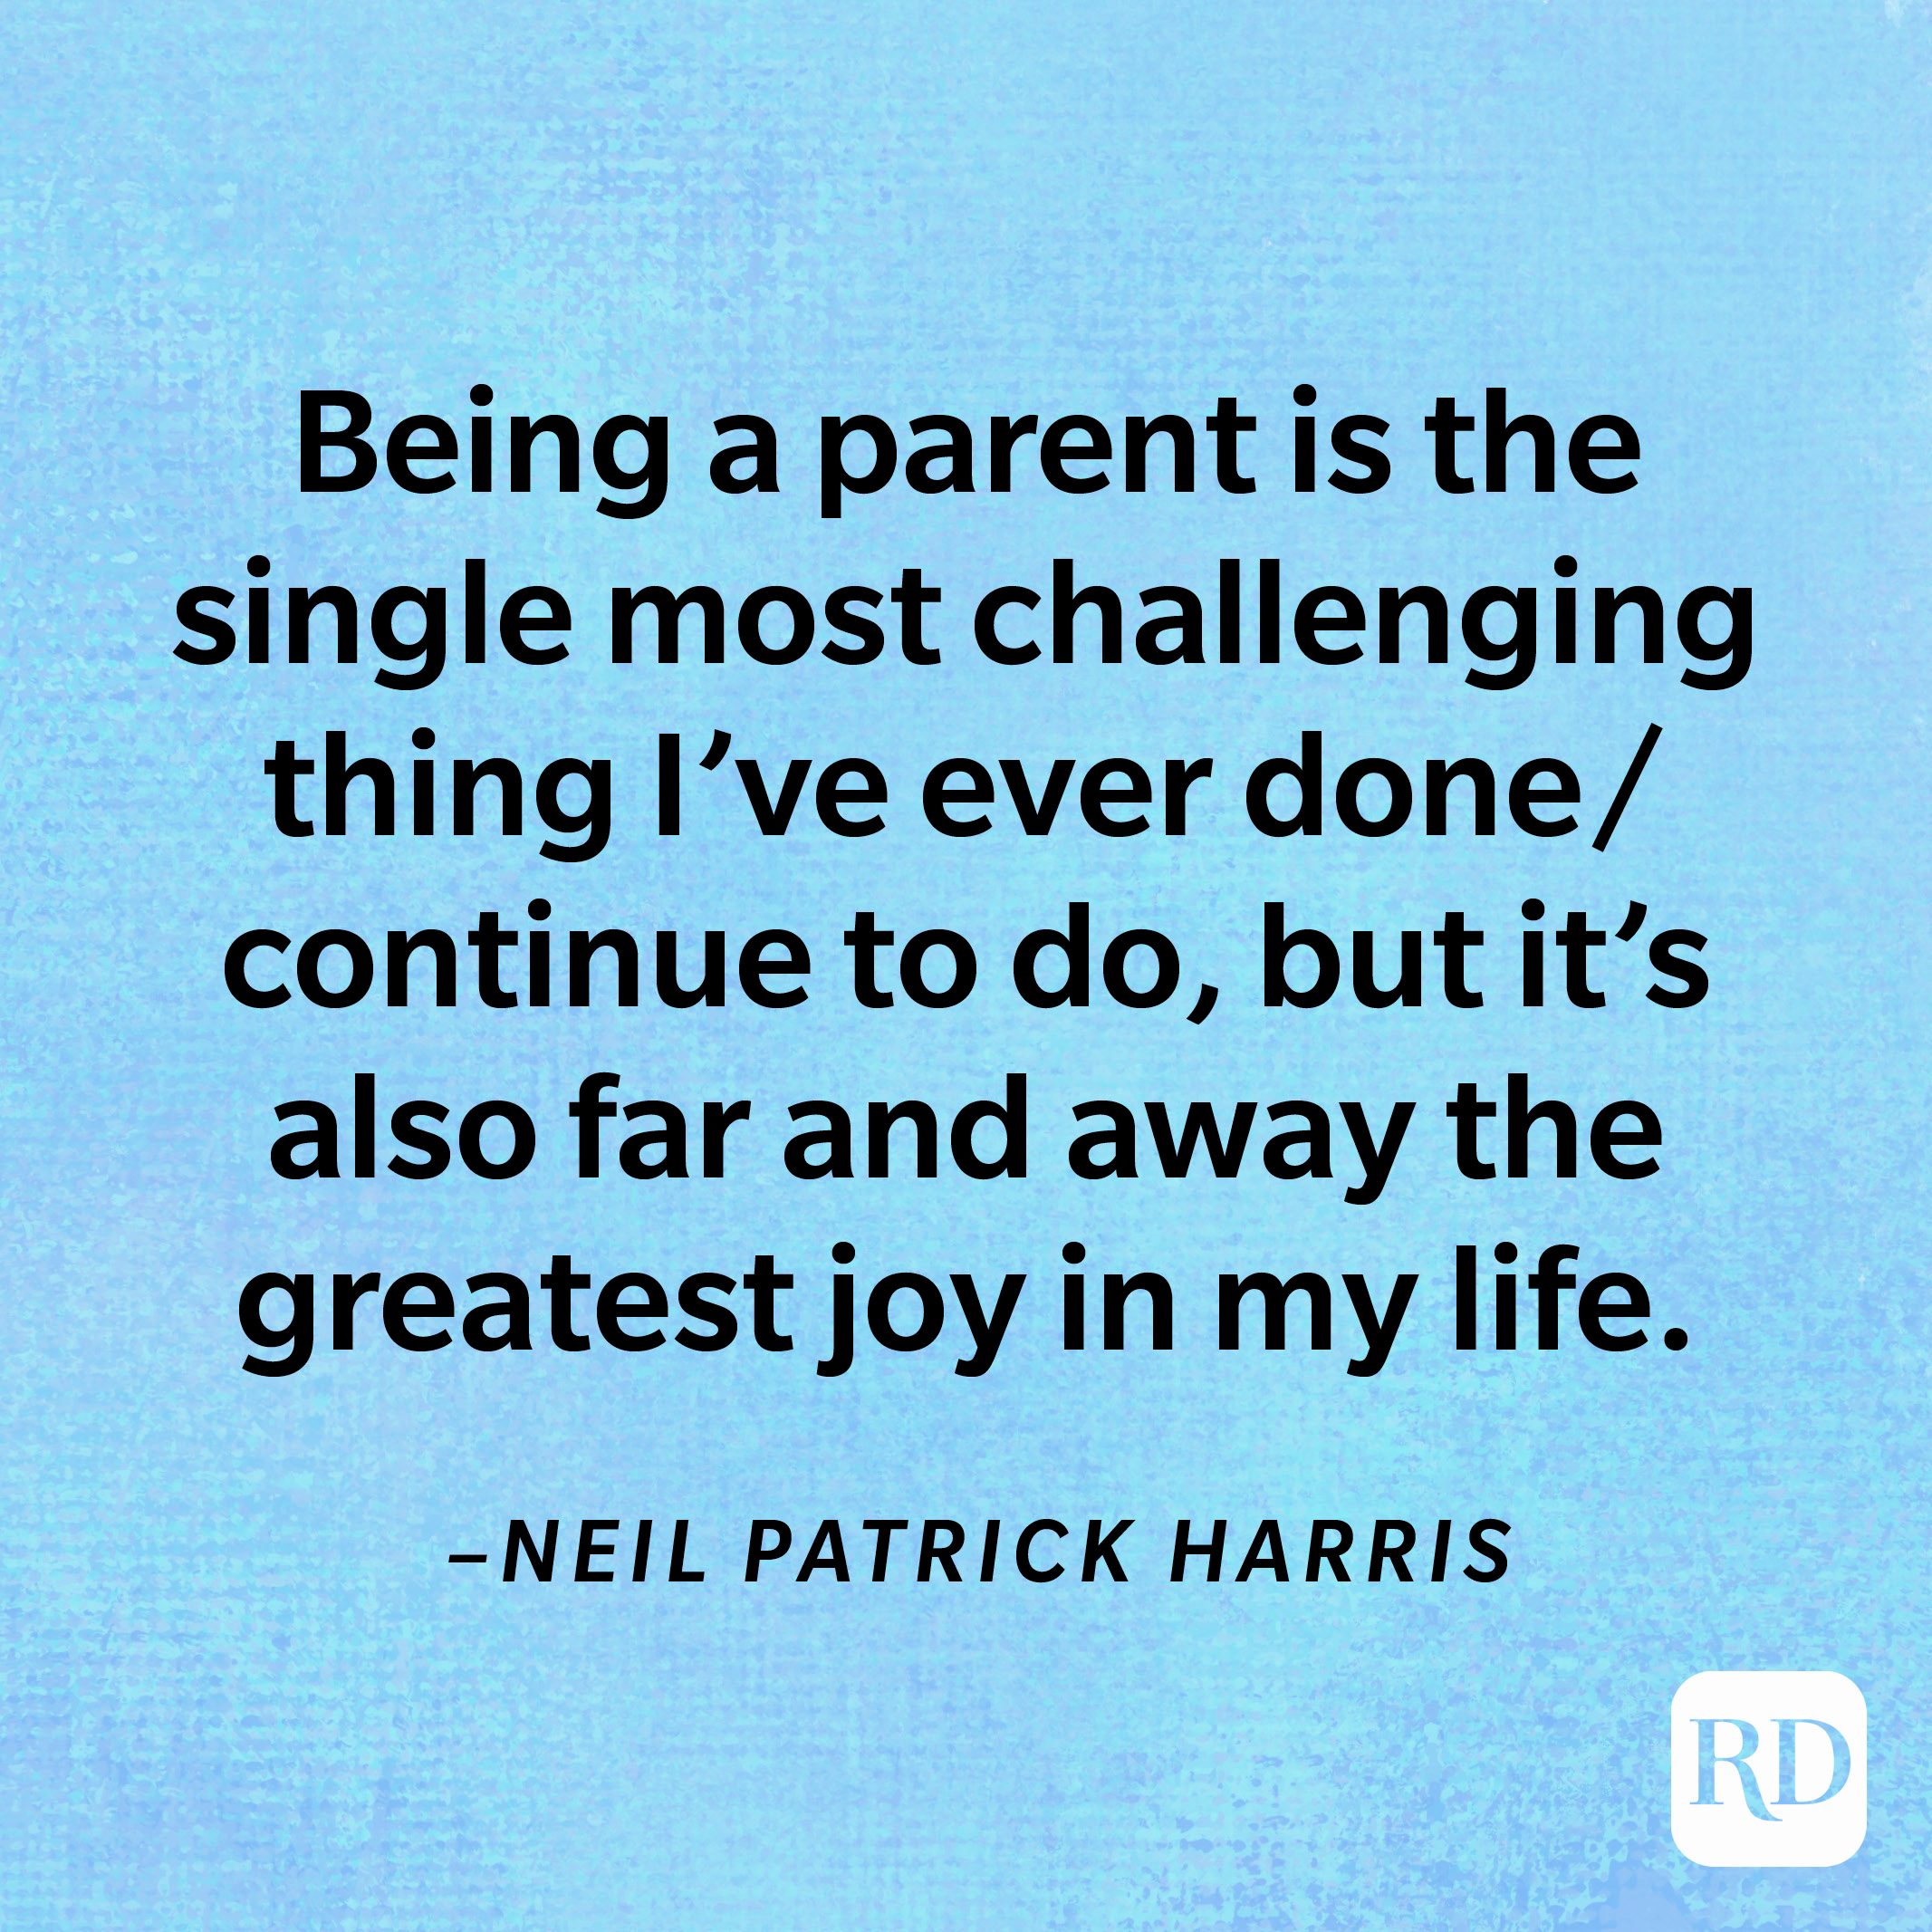 “Being a parent is the single most challenging thing I’ve ever done/continue to do, but it’s also far and away the greatest joy in my life. It has given me purpose, taught me patience, and expanded my heart.”—Neil Patrick Harris 